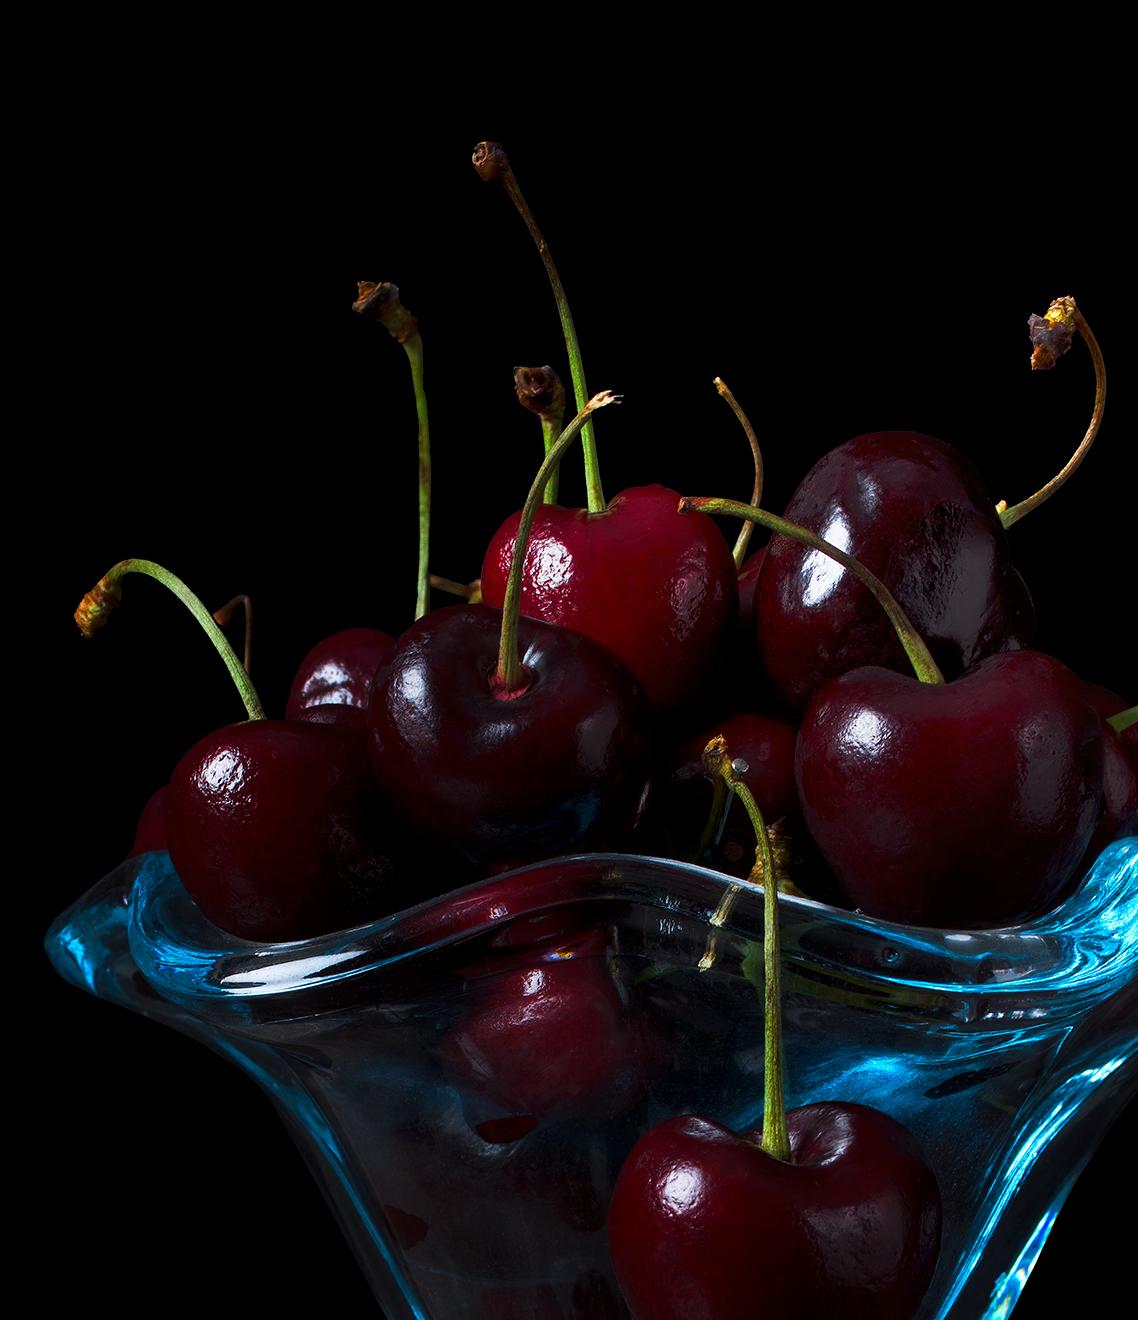 Cerezas. From The Bodegones still life color photography  series - Photograph by Dora Franco